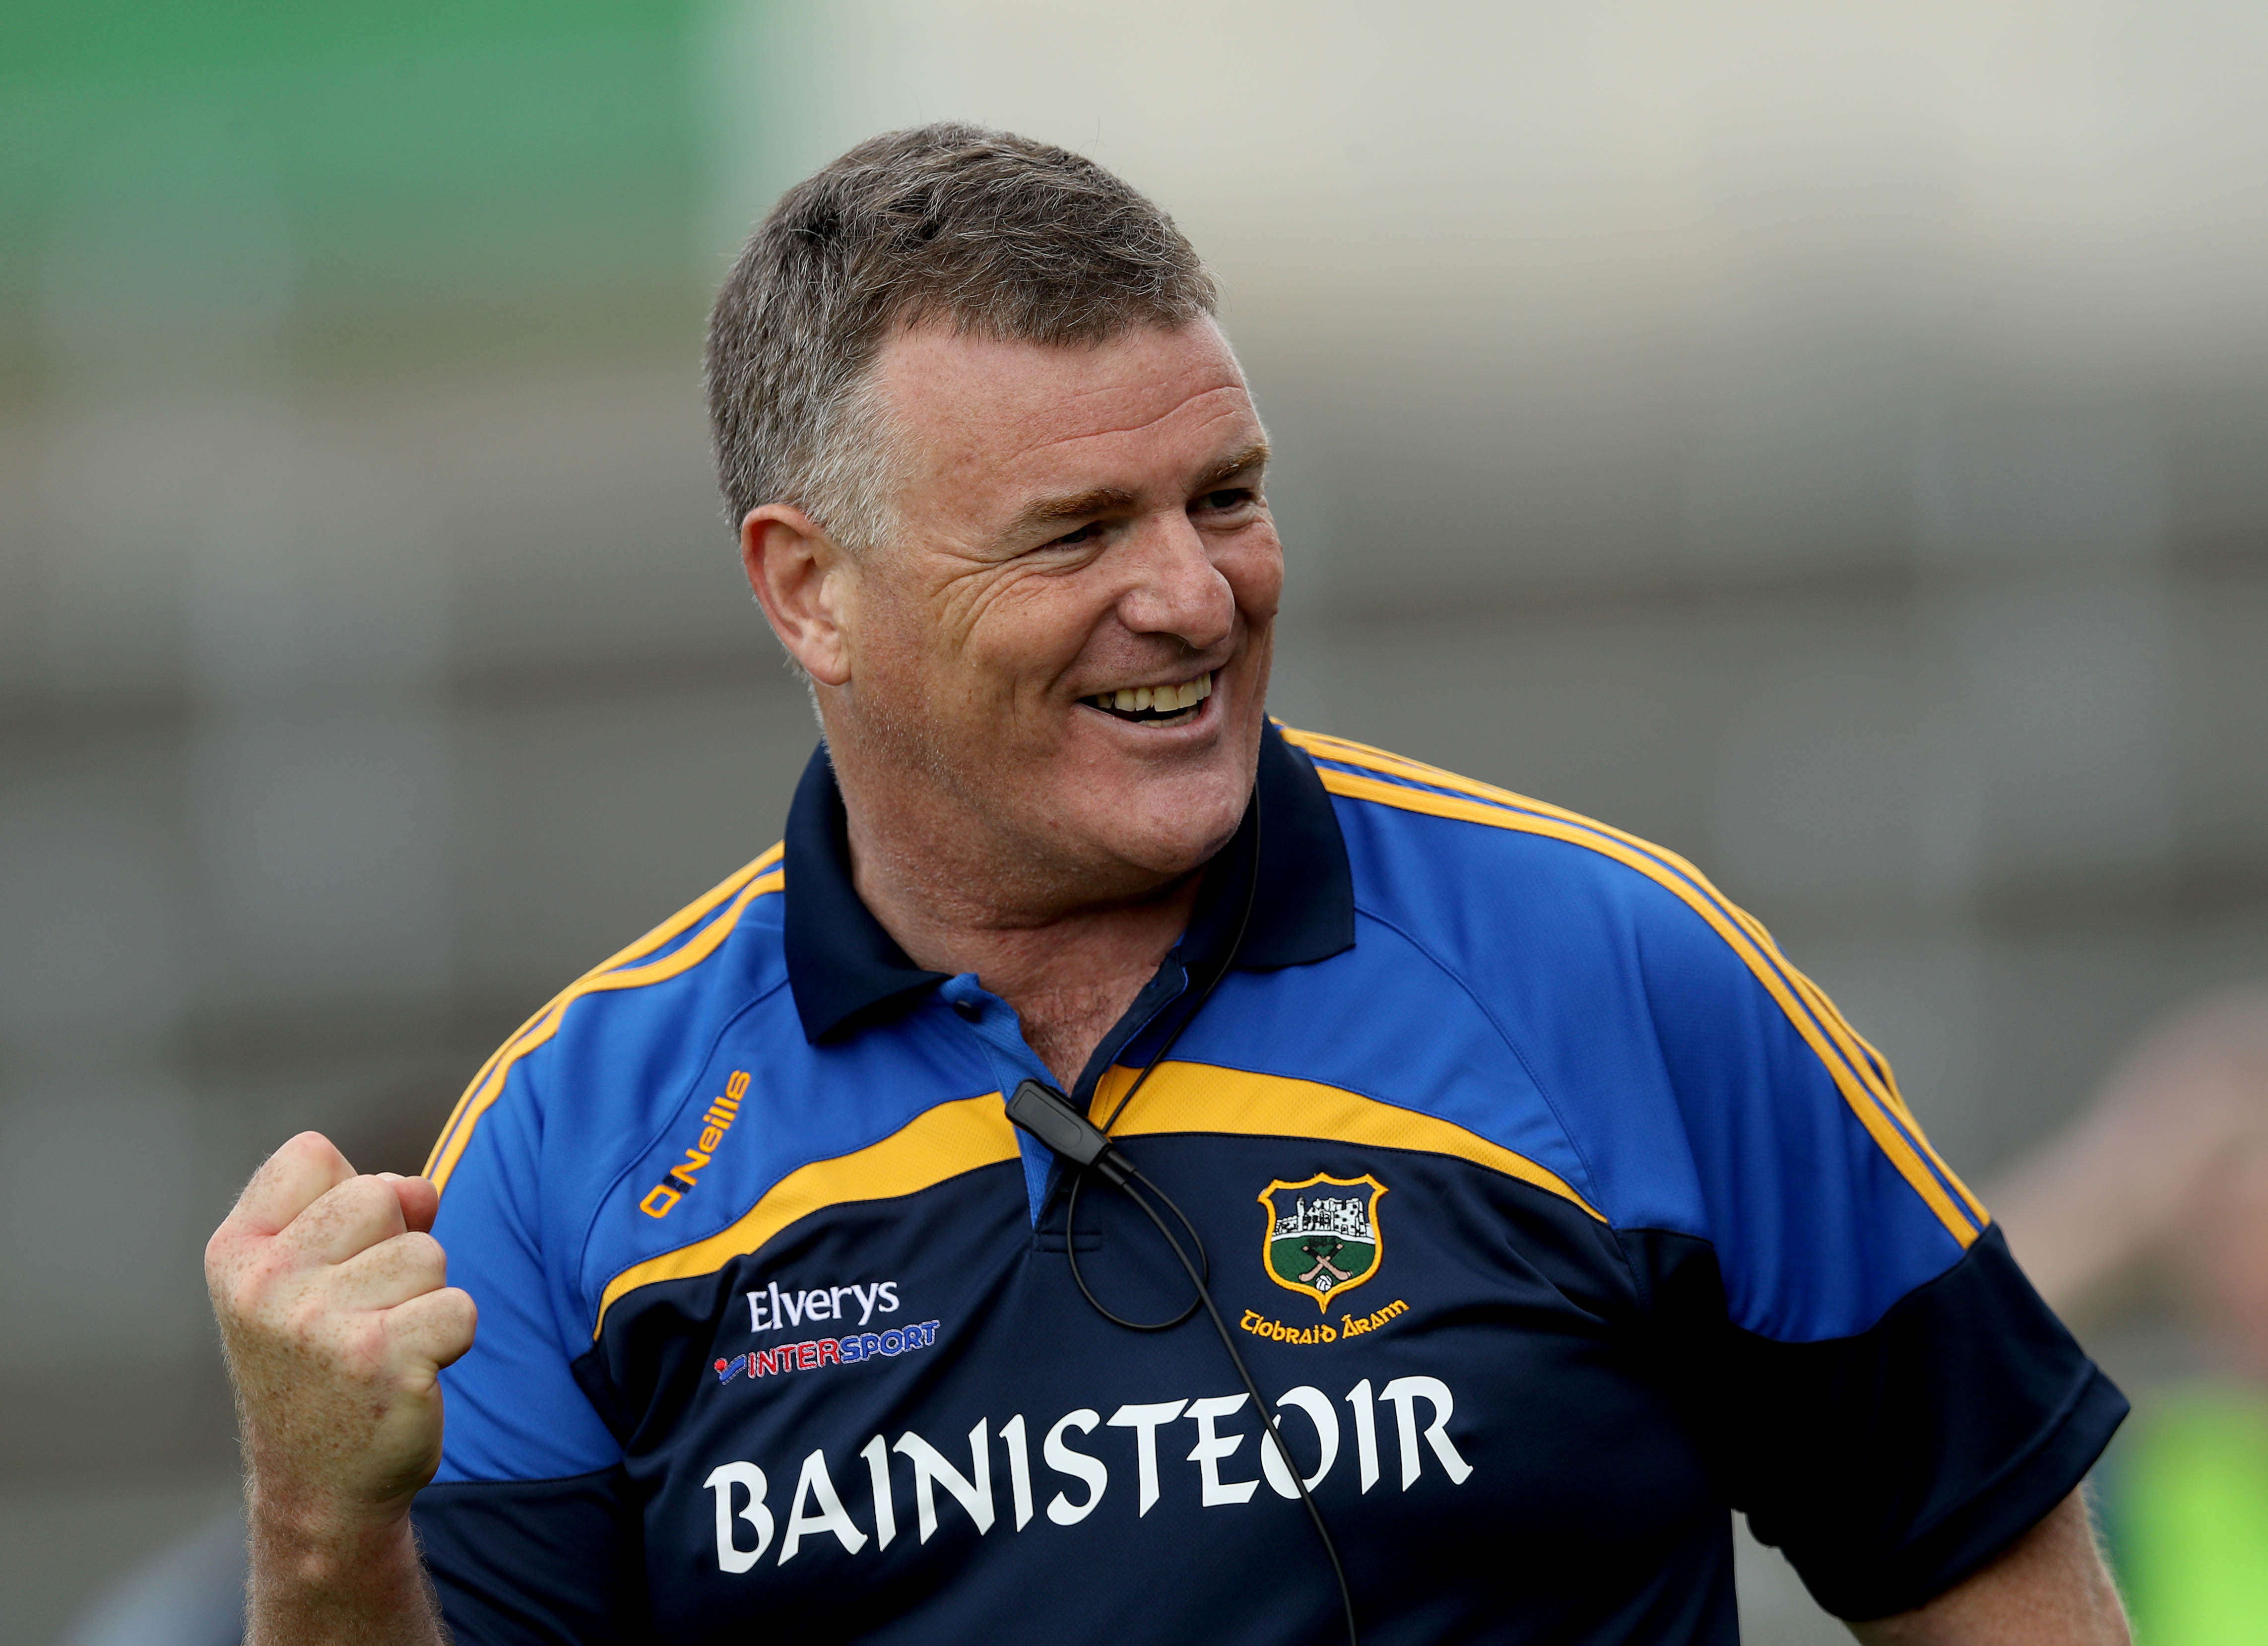 Manager Liam Kearns has announced the starting fifteen for Sunday's clash  against Fermanagh in round two of the Allianz League. After last week's  disappointing loss, Tipperary will be anxious to get two vital points to  kickstart their season.